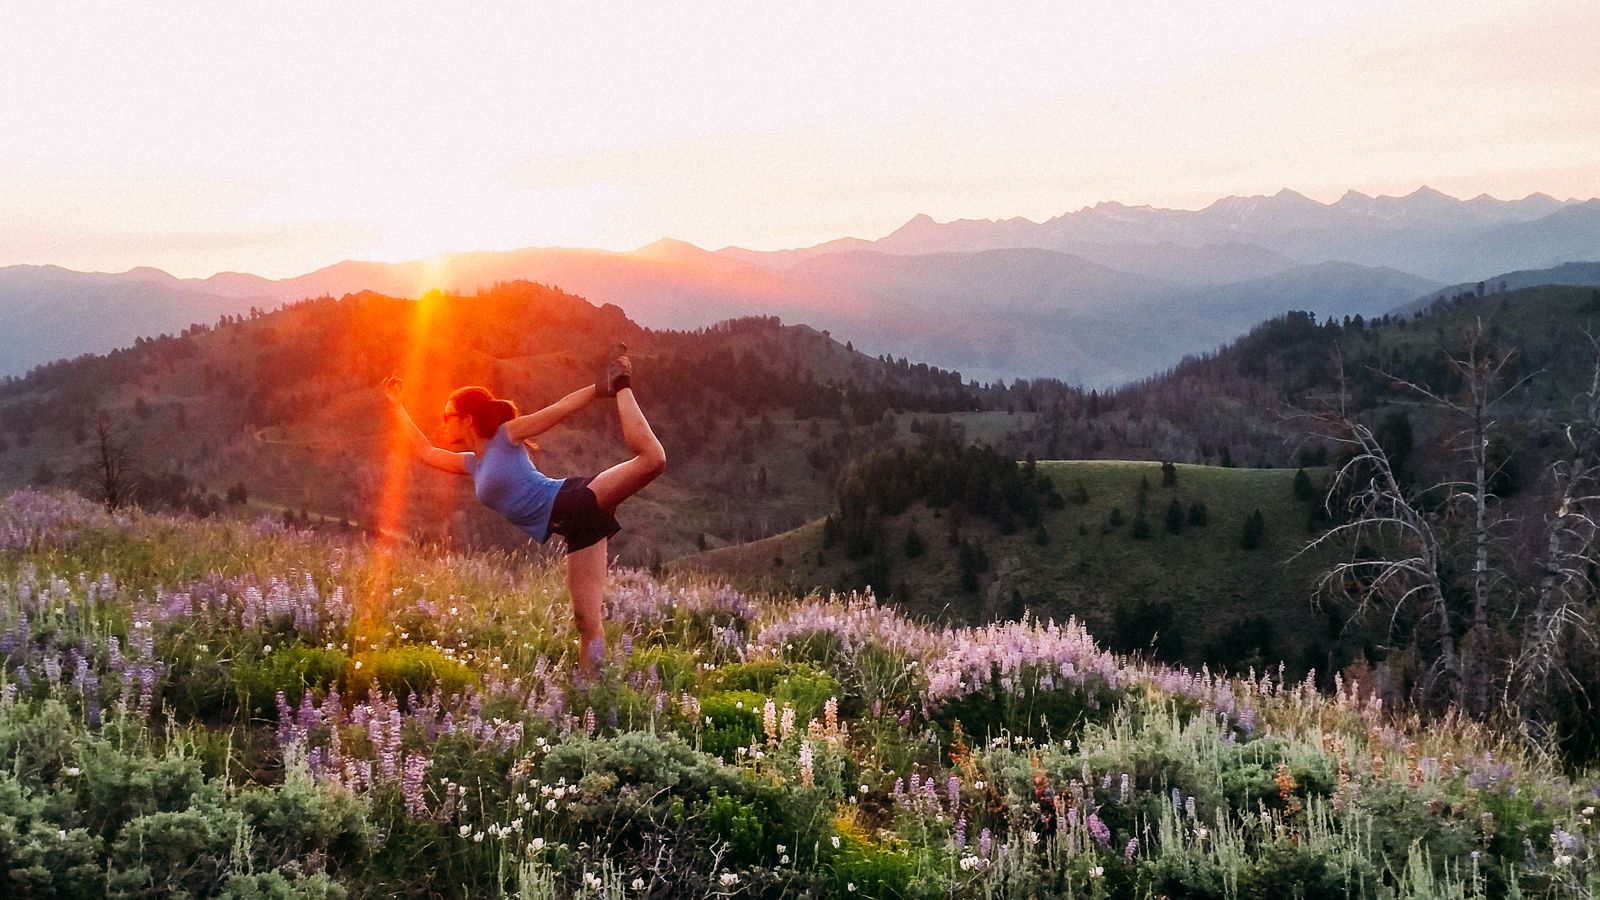 Best Hikes to Catch the Blooming Wildflowers. Visit Sun Valley